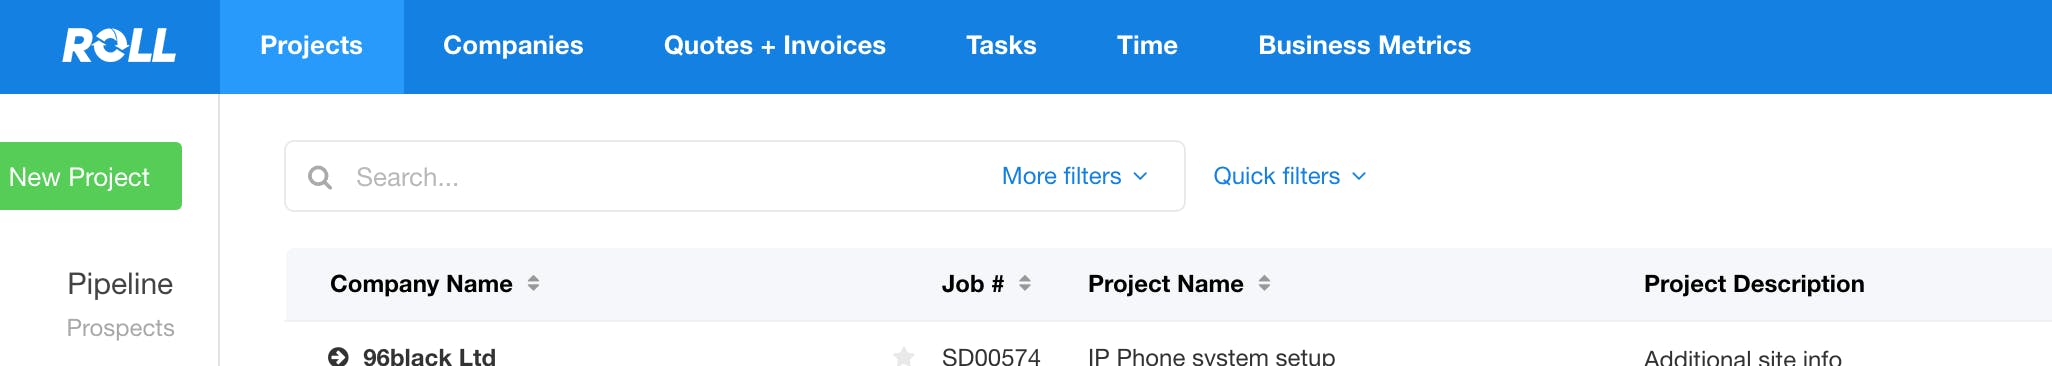 Projects search screen in Roll